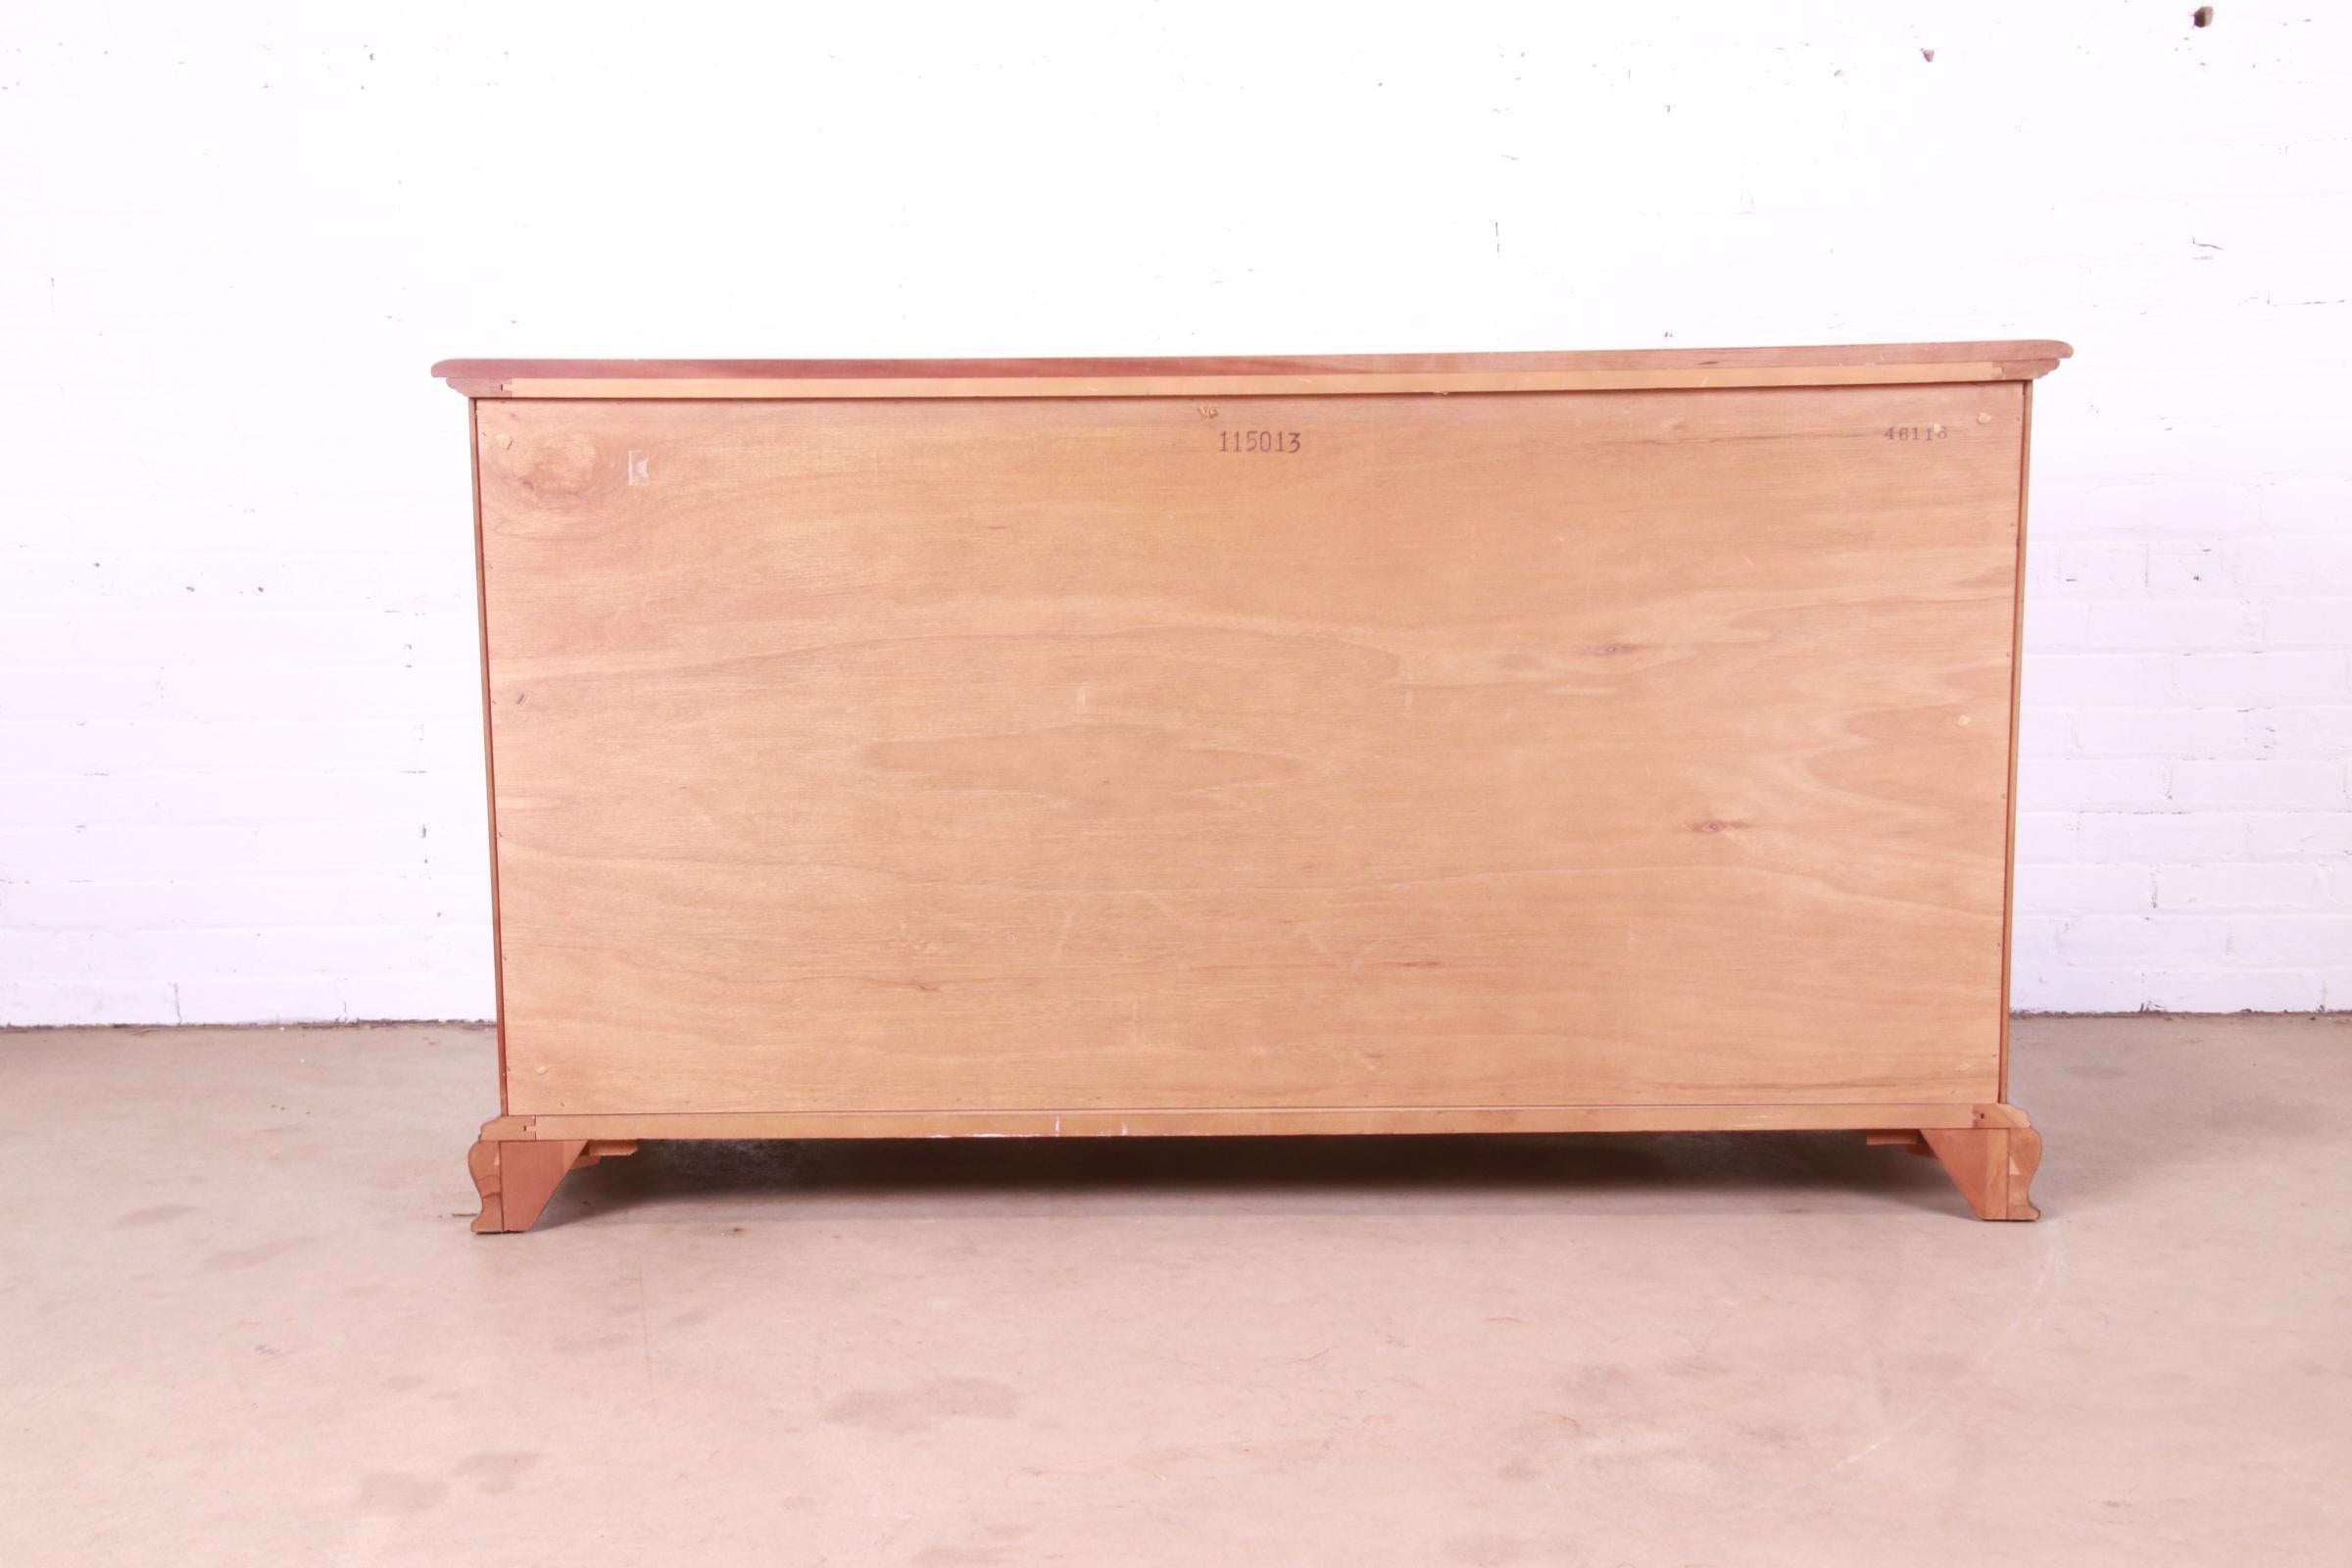 Ethan Allen Early American Solid Cherry Wood Chest of Drawers, Circa 1970s 10